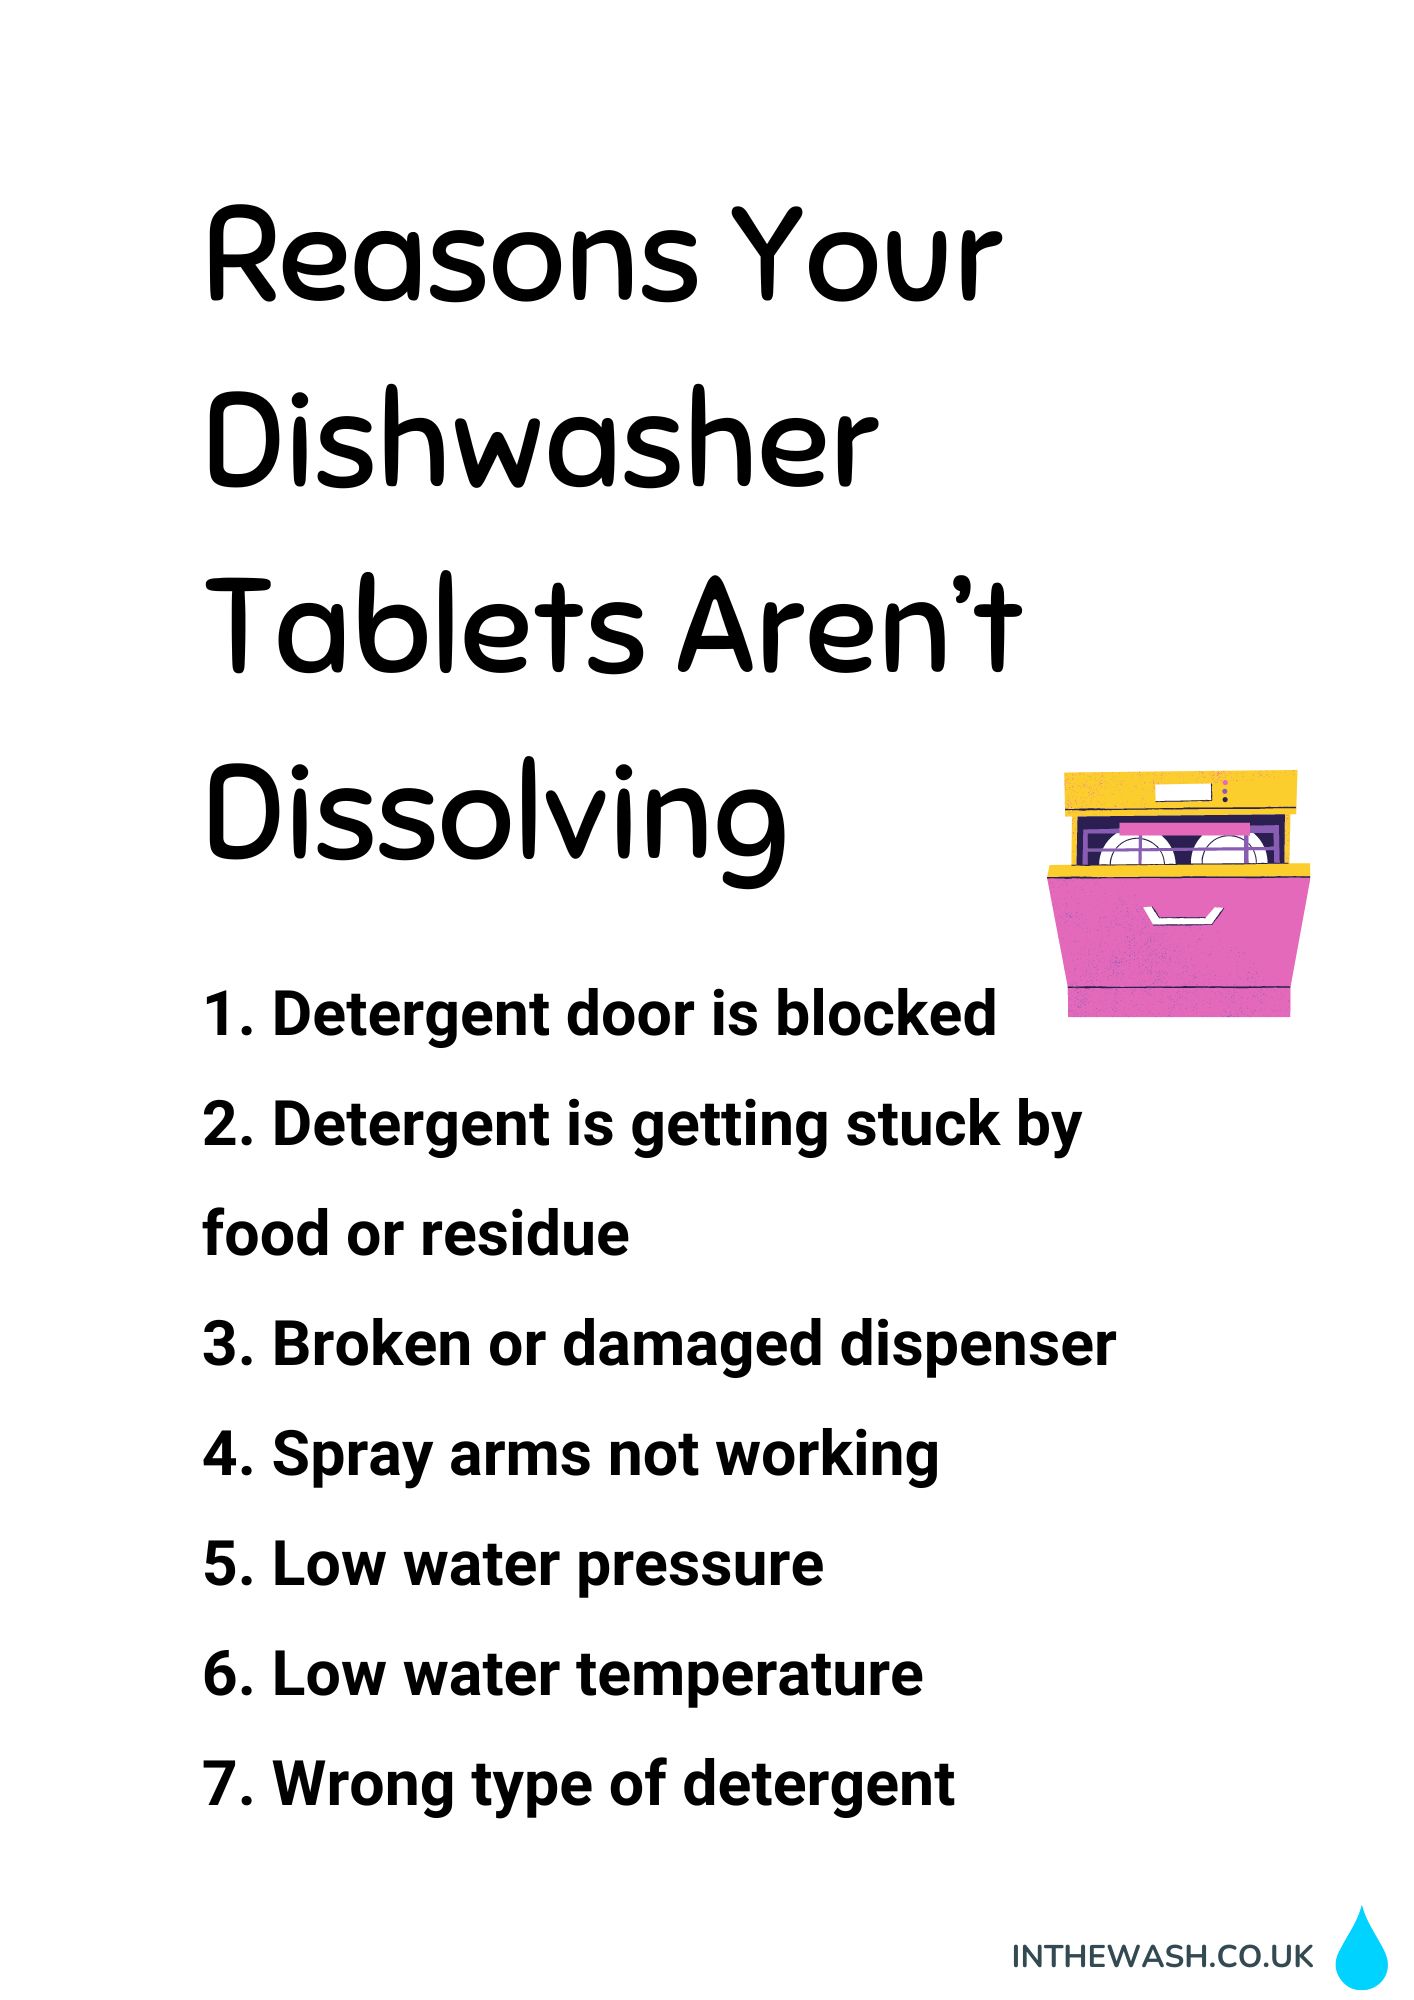 Reasons your dishwasher tablets aren't dissolving